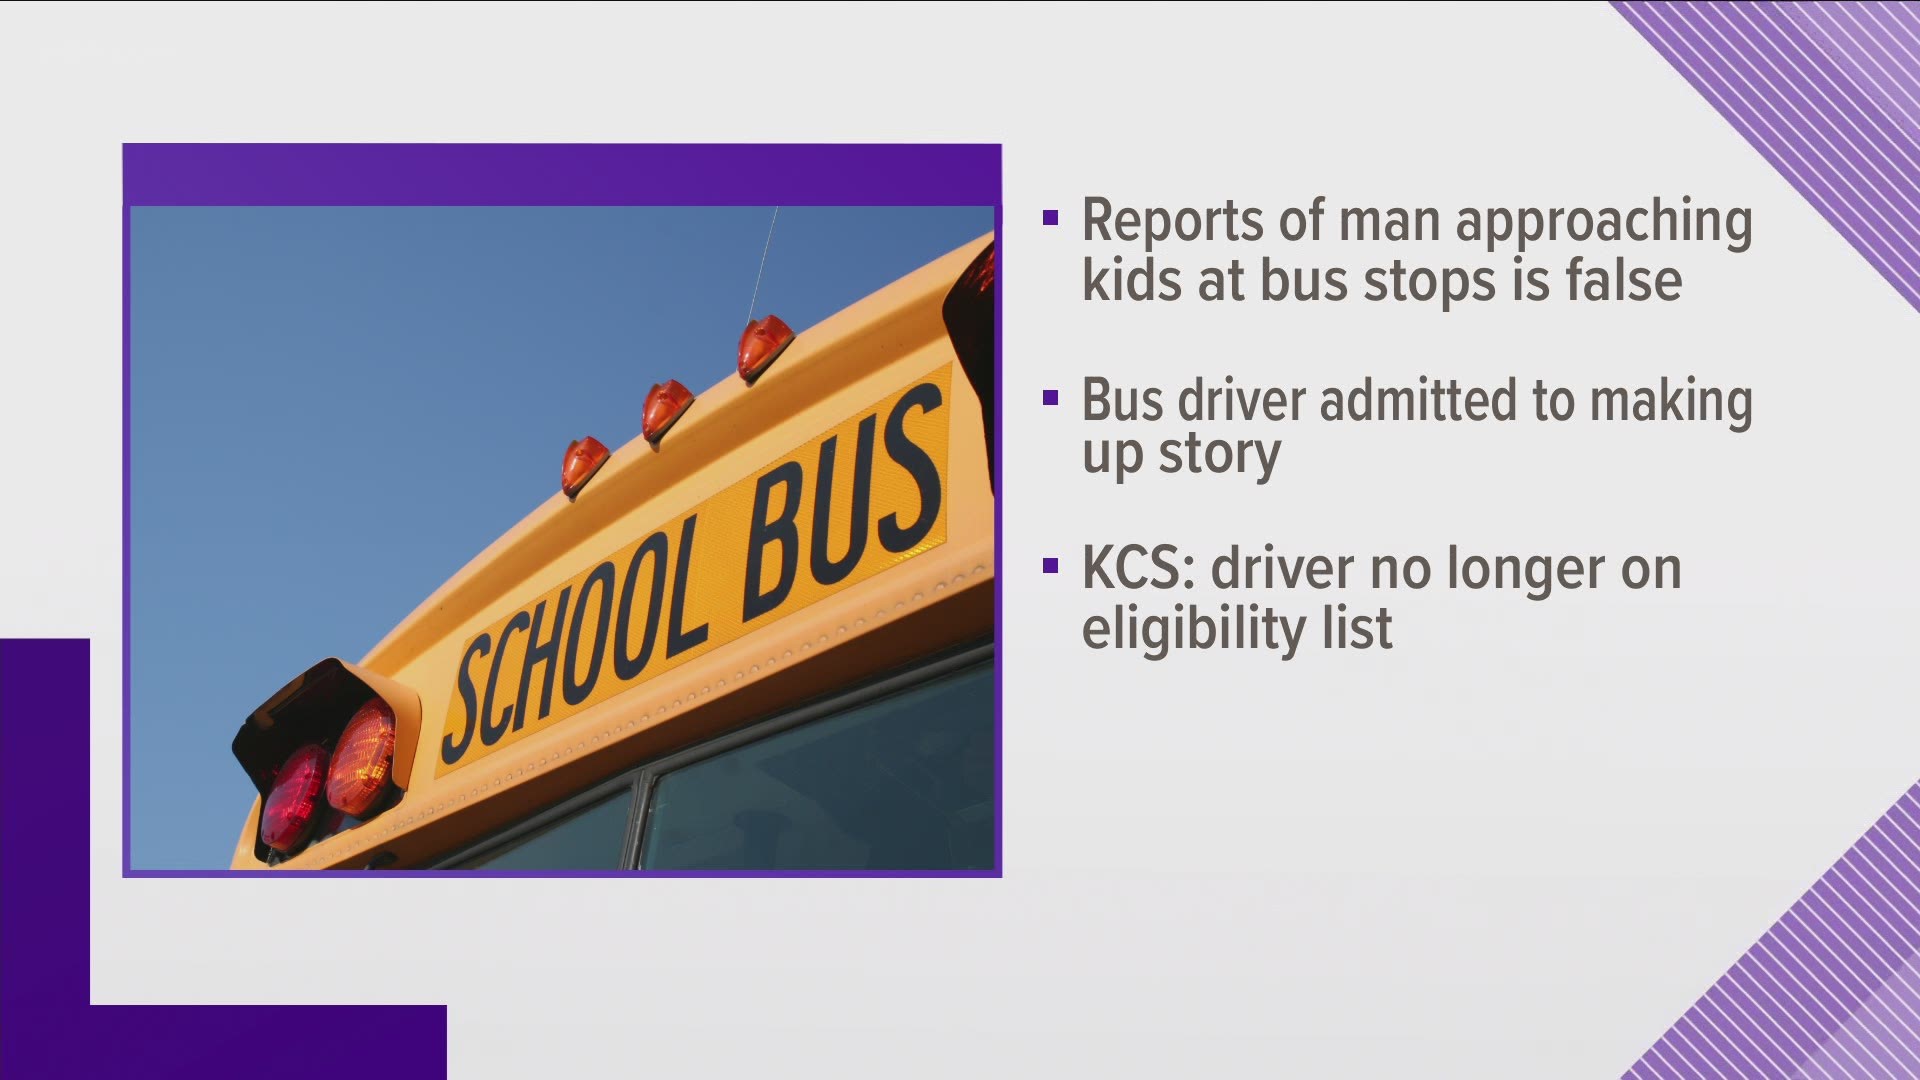 After an investigation, detectives said the Knox County bus driver who originally reported the story admitted it was made up.